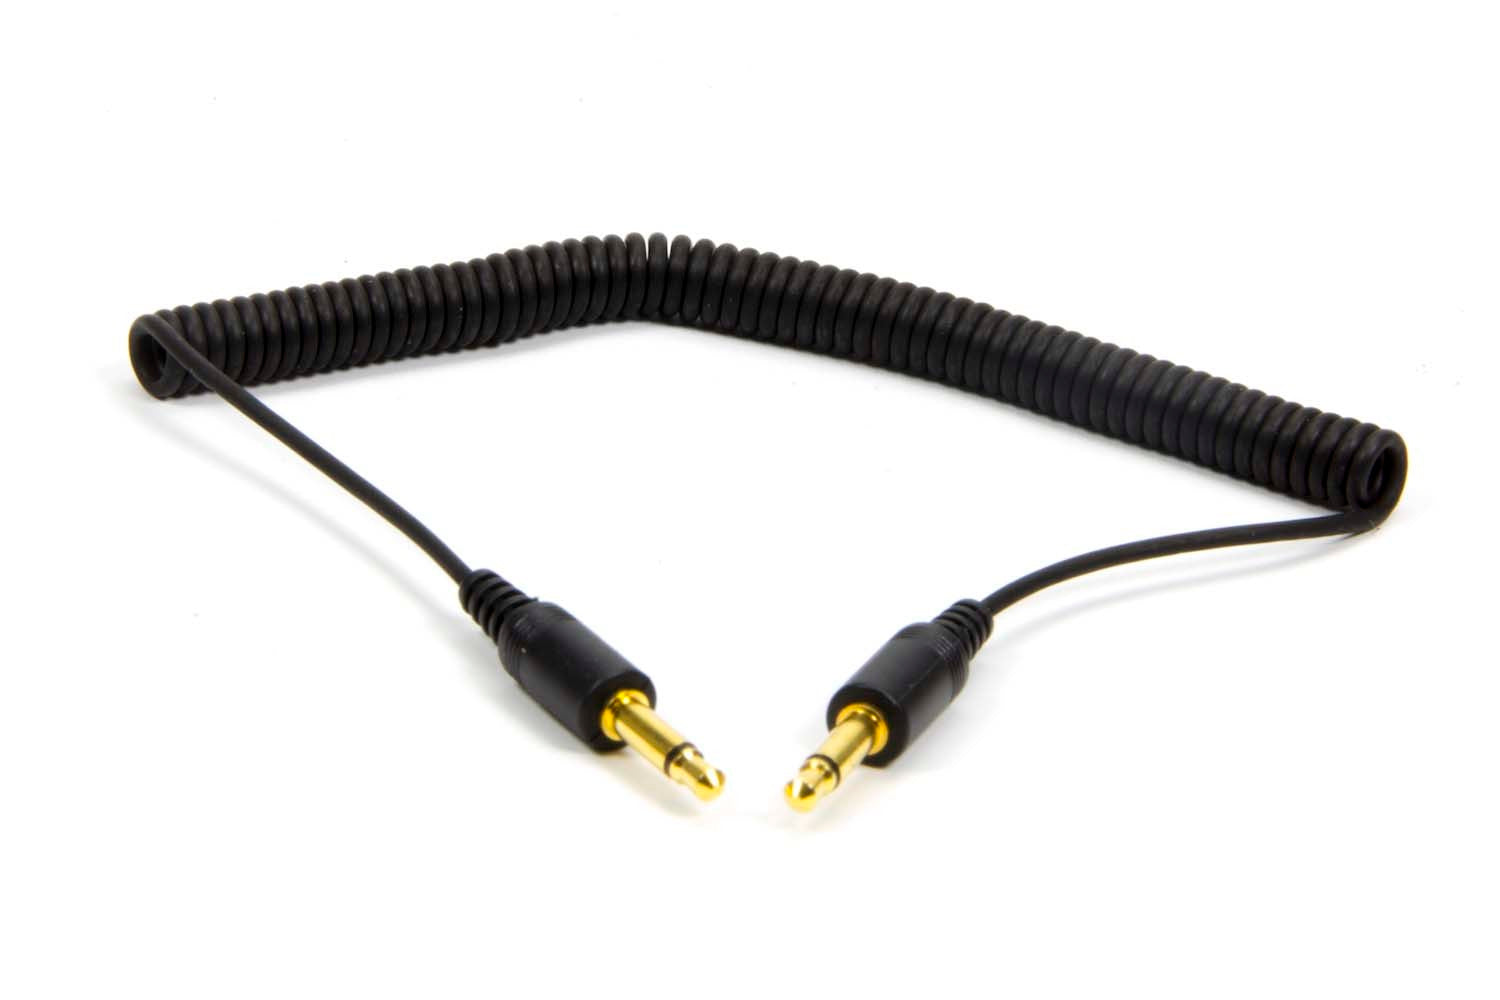 Raceceiver Cord Extra Long for Ace to Radio RCVCC360